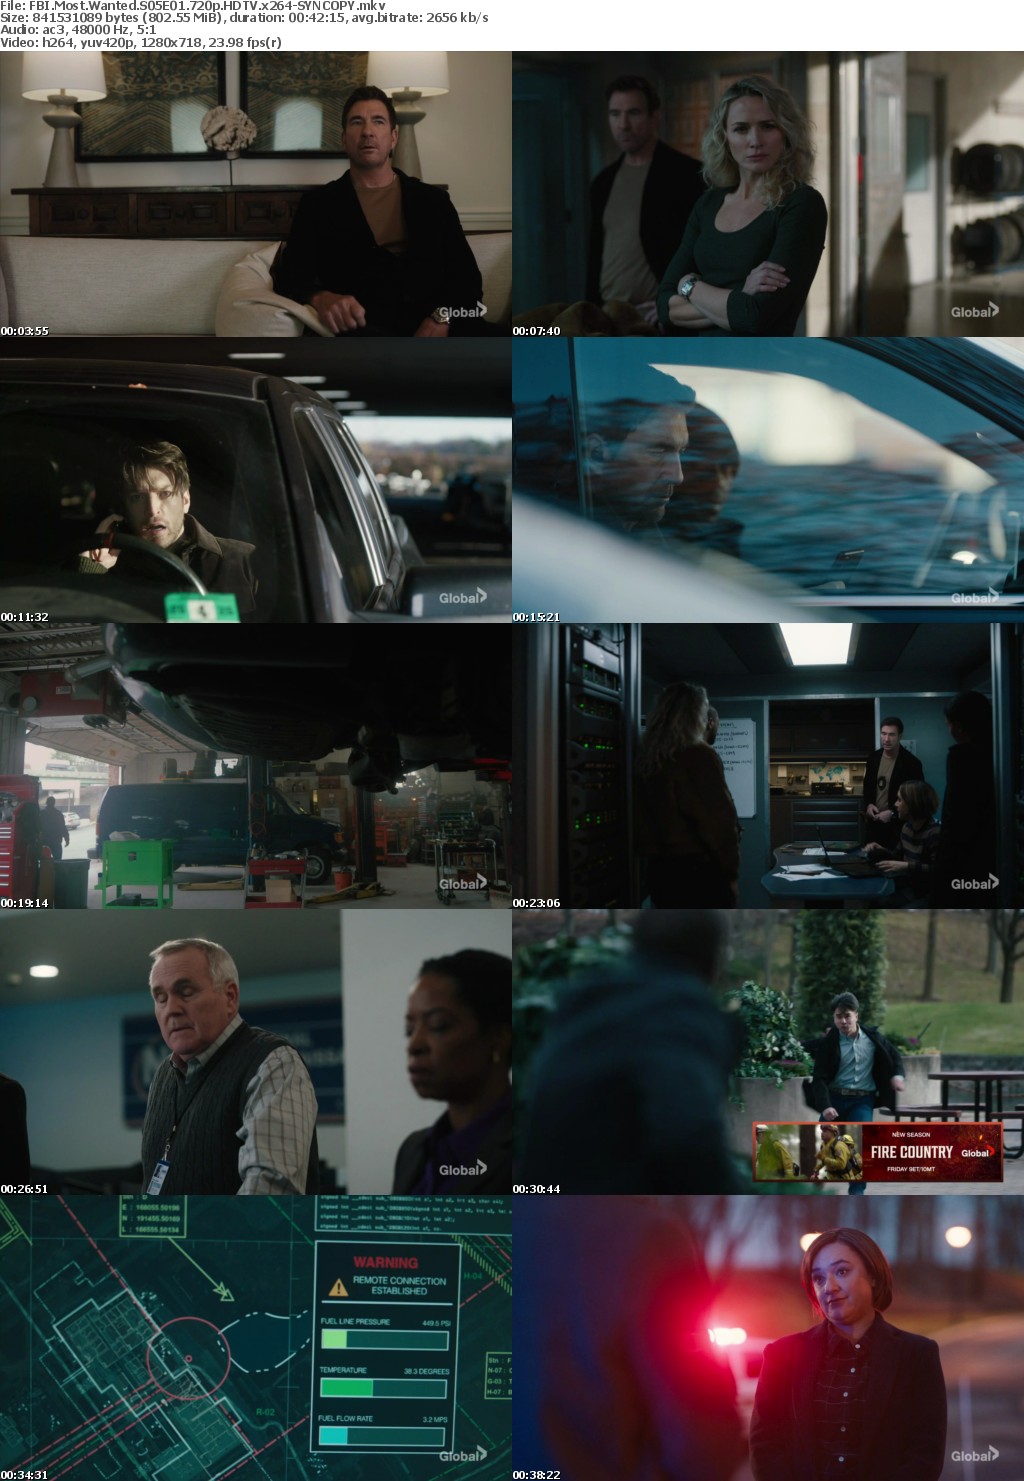 FBI Most Wanted S05E01 720p HDTV x264-SYNCOPY